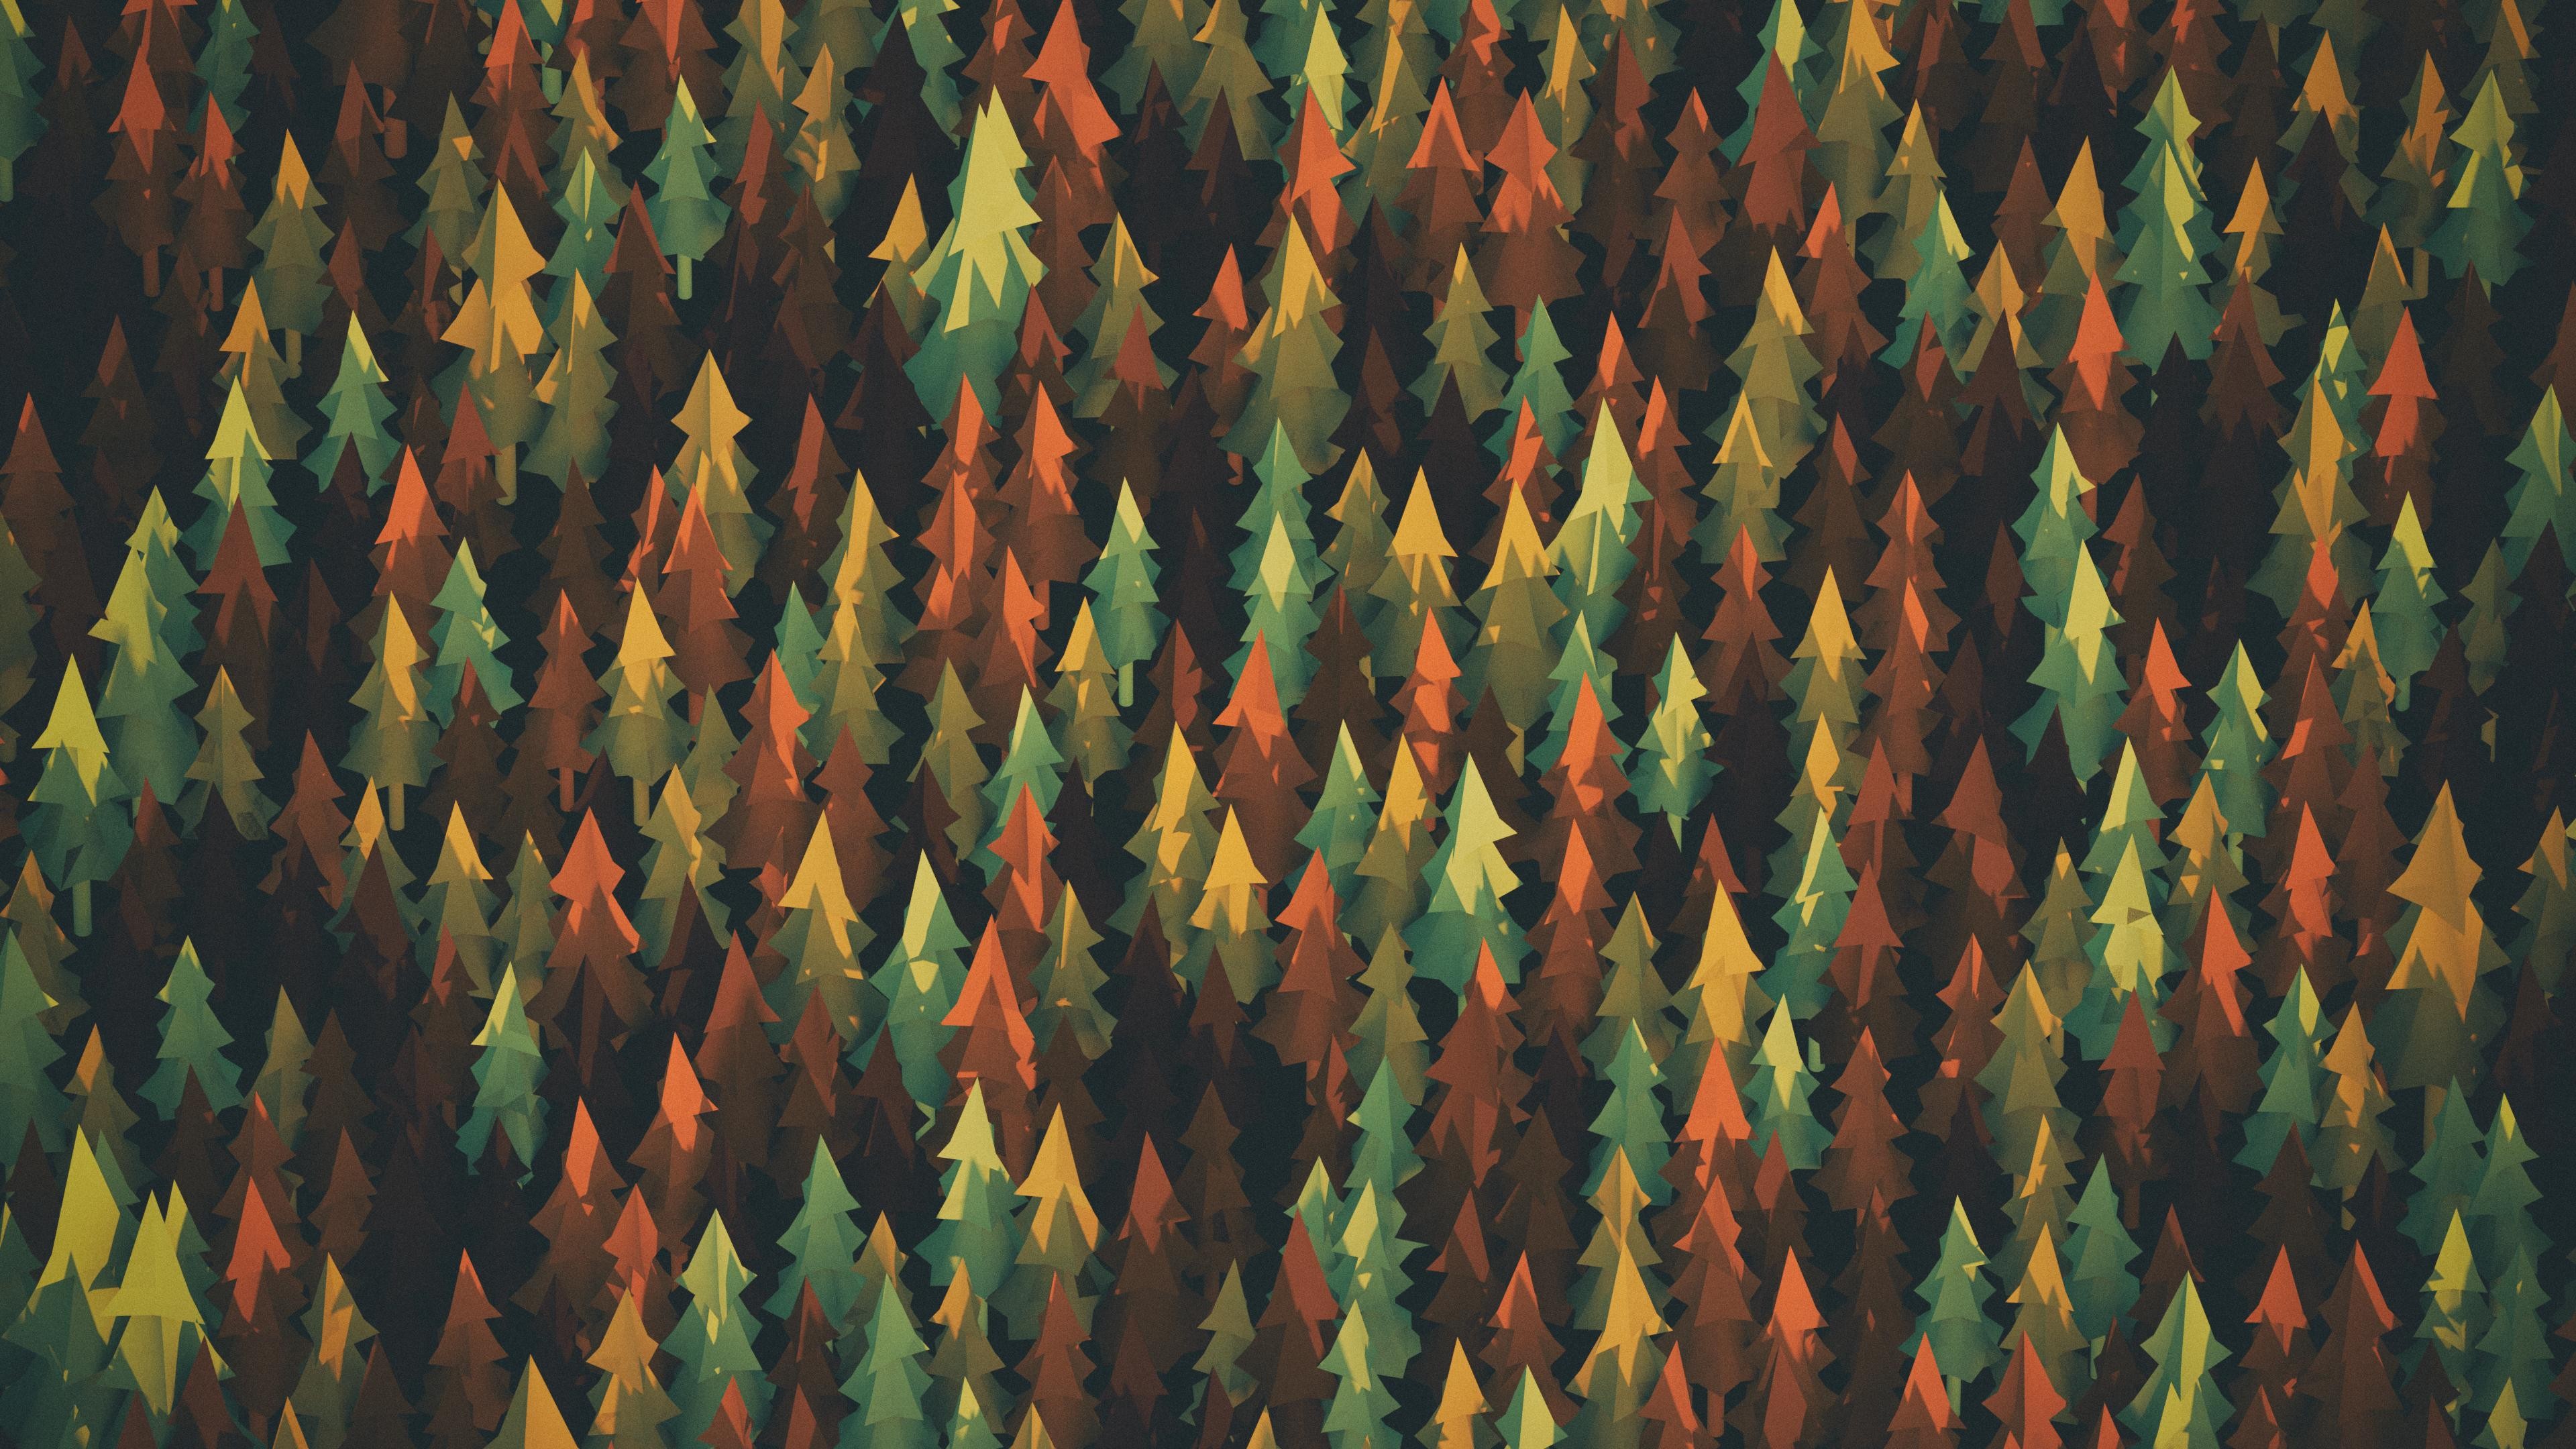 Autumn Pattern Wallpapers - Wallpaper Cave